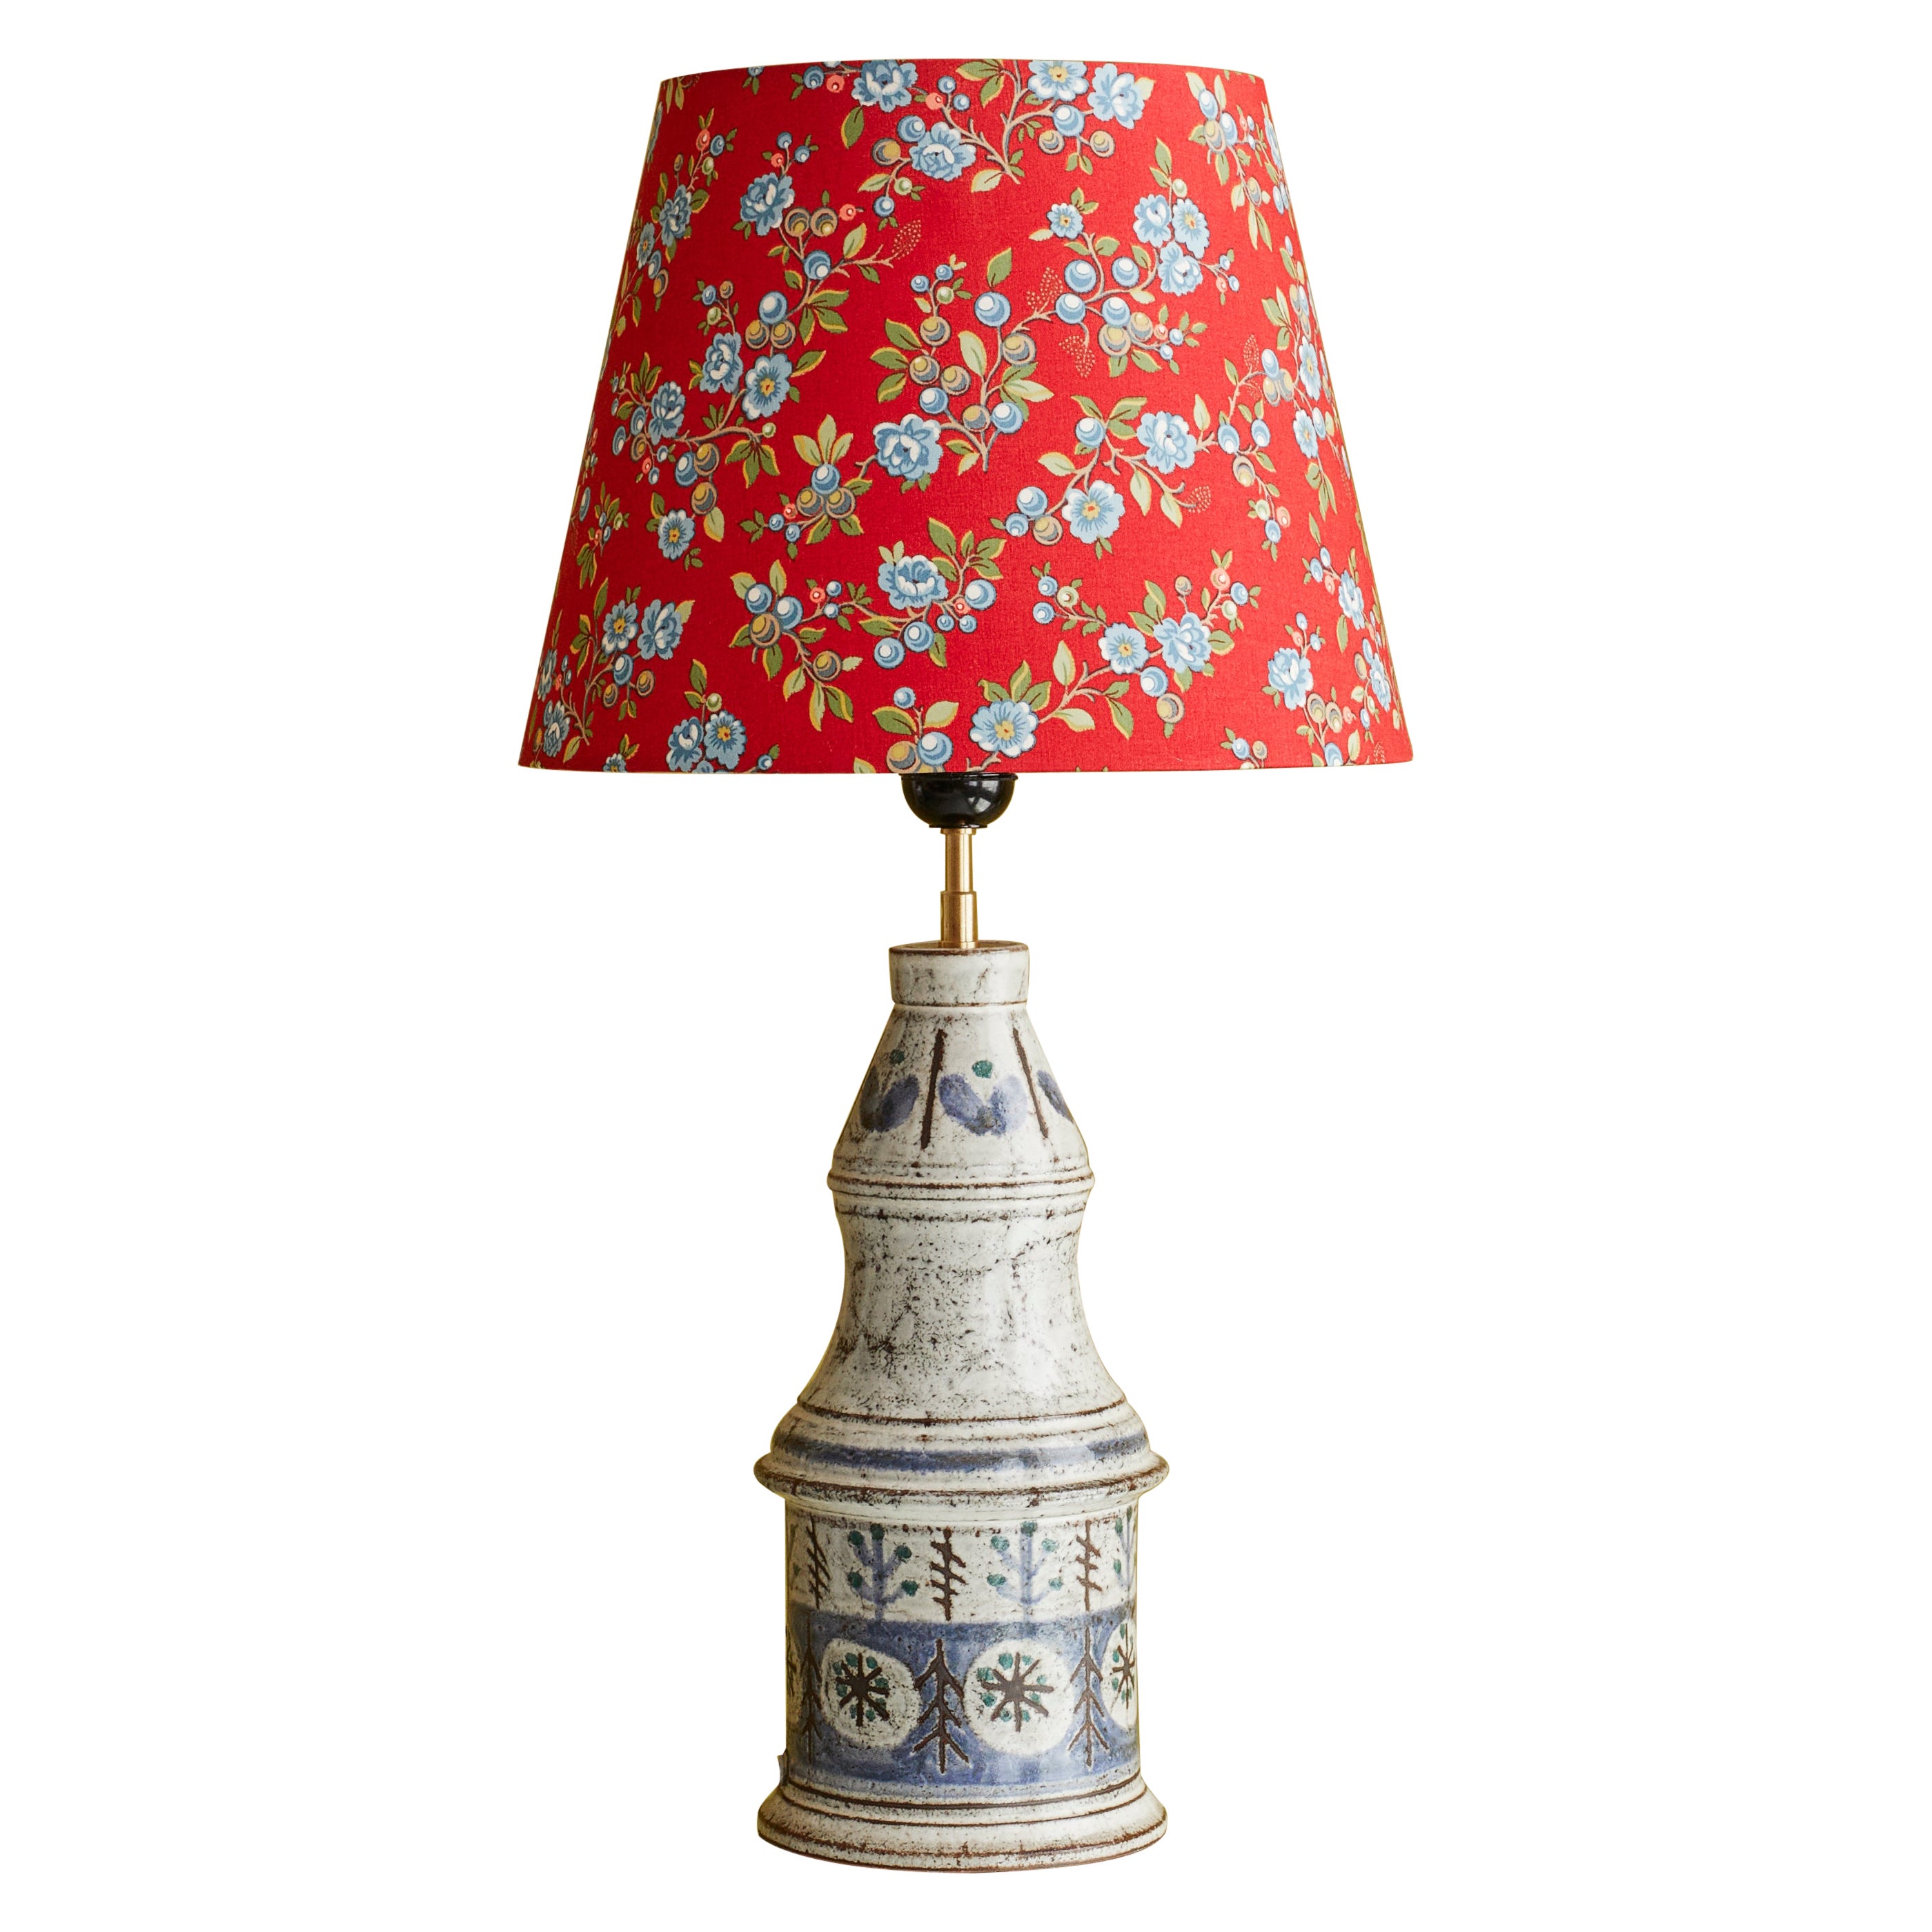 Vintage Gustave Reynaud Ceramic Table Lamp with Customized Shade, France, 1960's